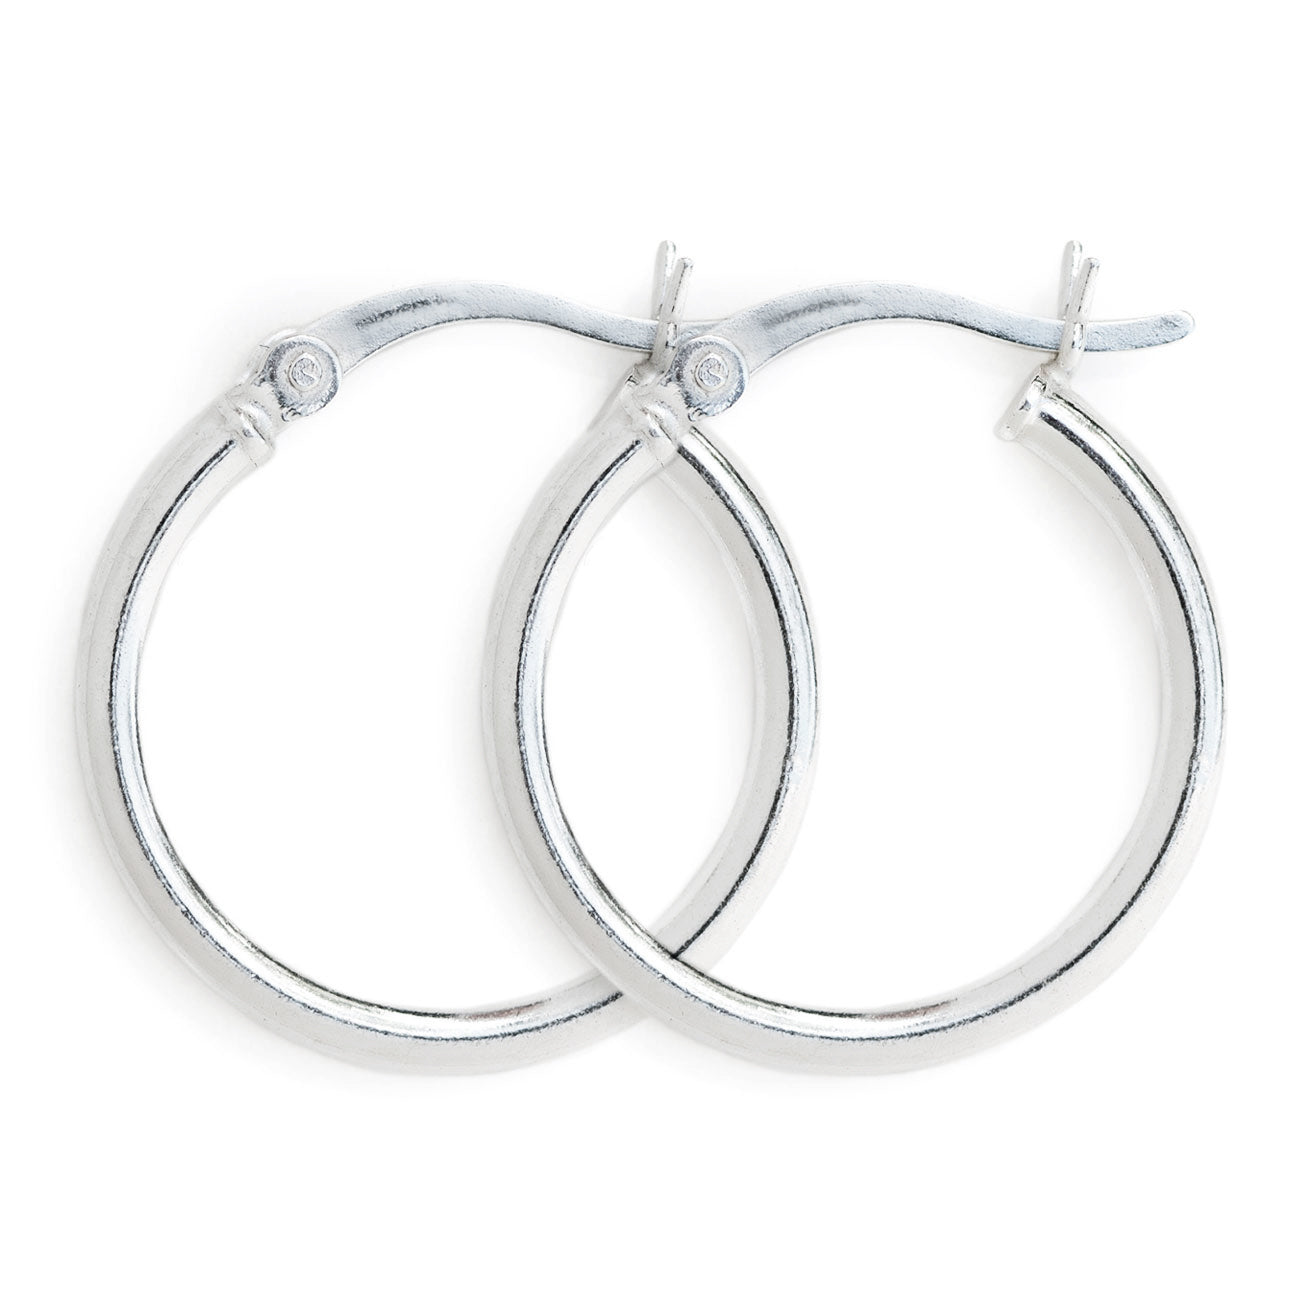 Share more than 236 sterling silver round earrings best